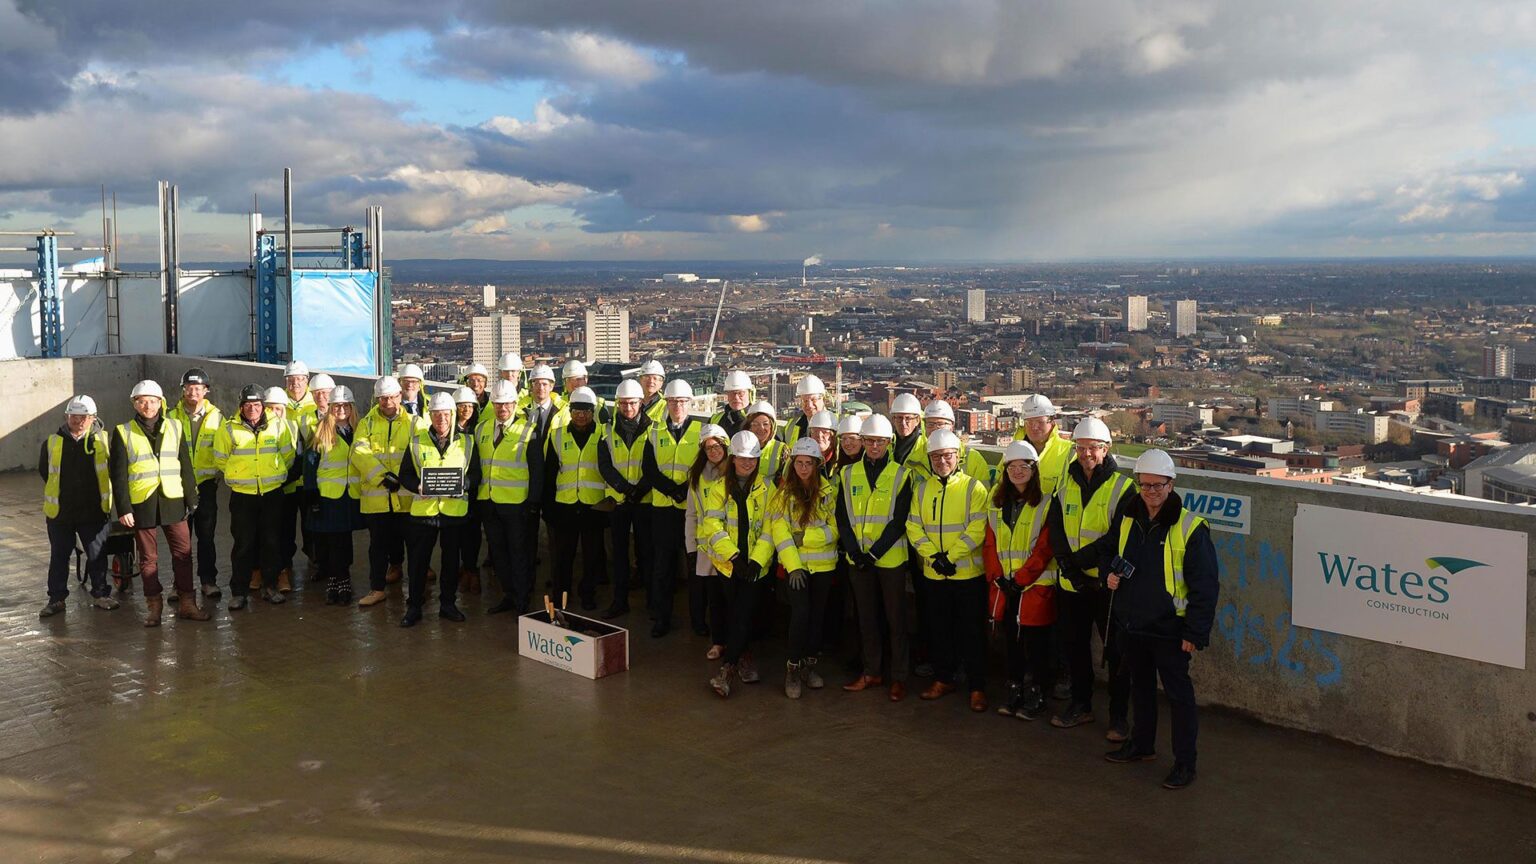 A new addition to the Birmingham Skyline, another success for the UK housing market